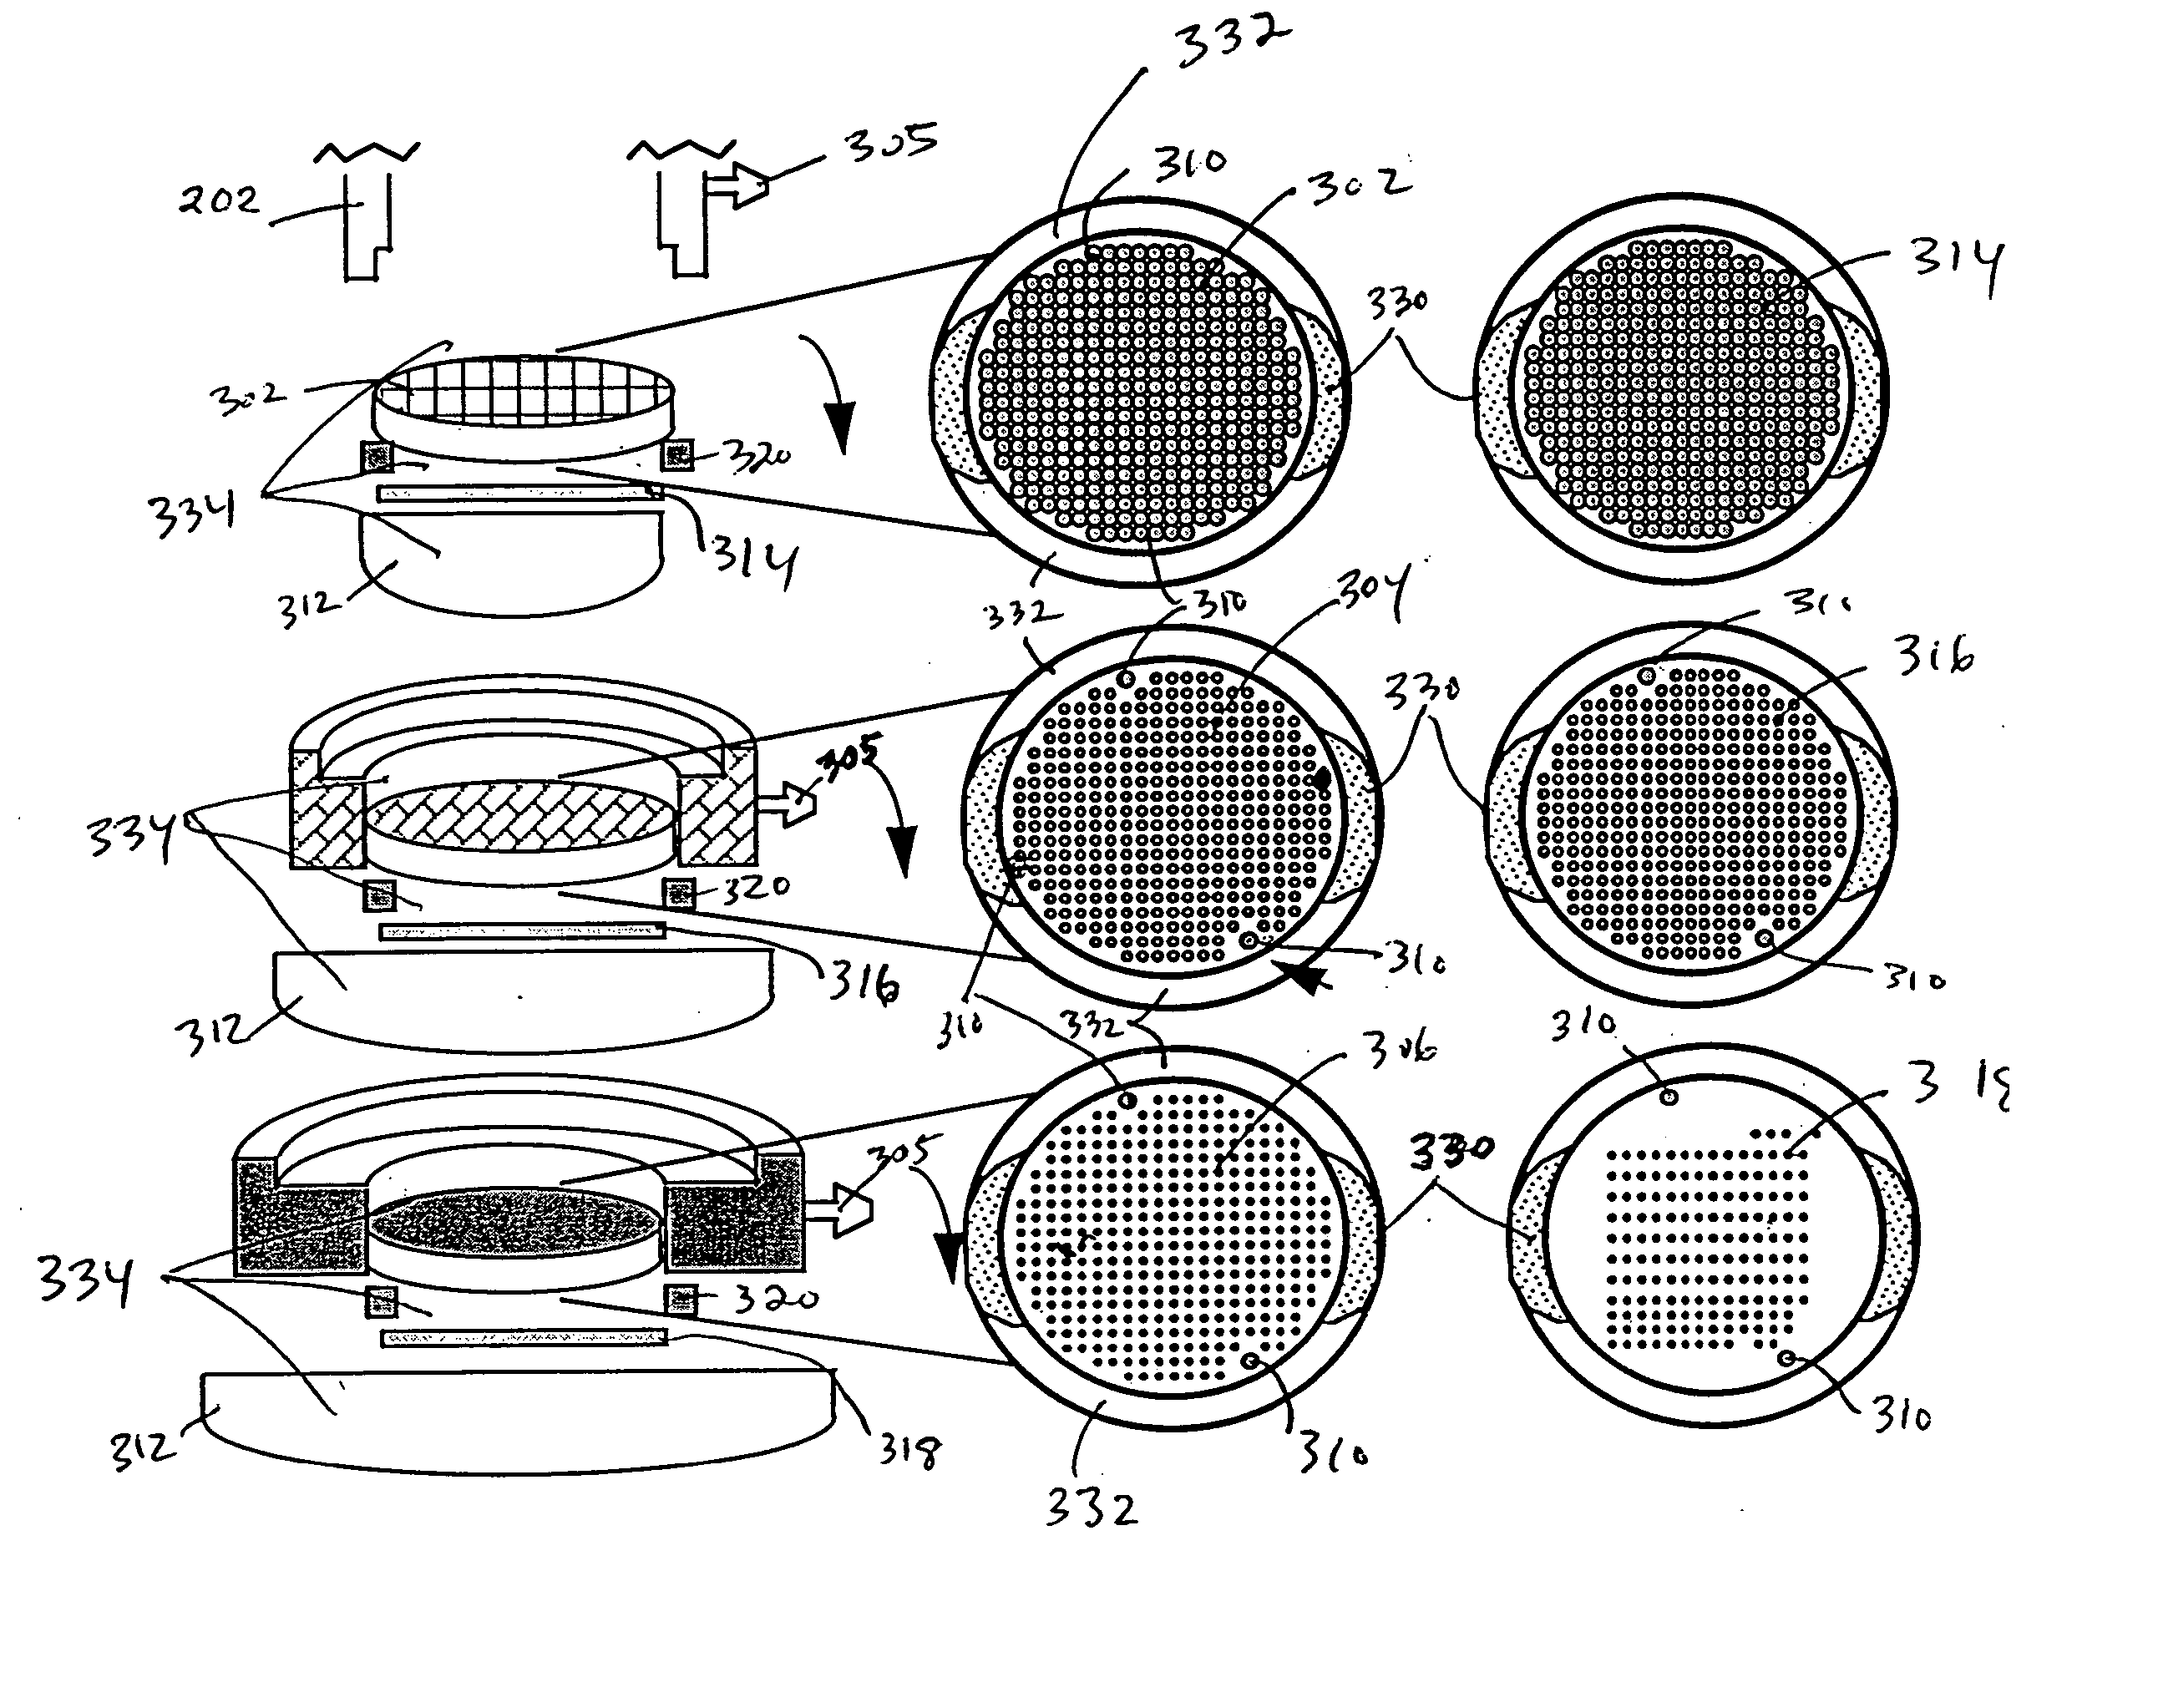 Bioreactor design and process for engineering tissue from cells